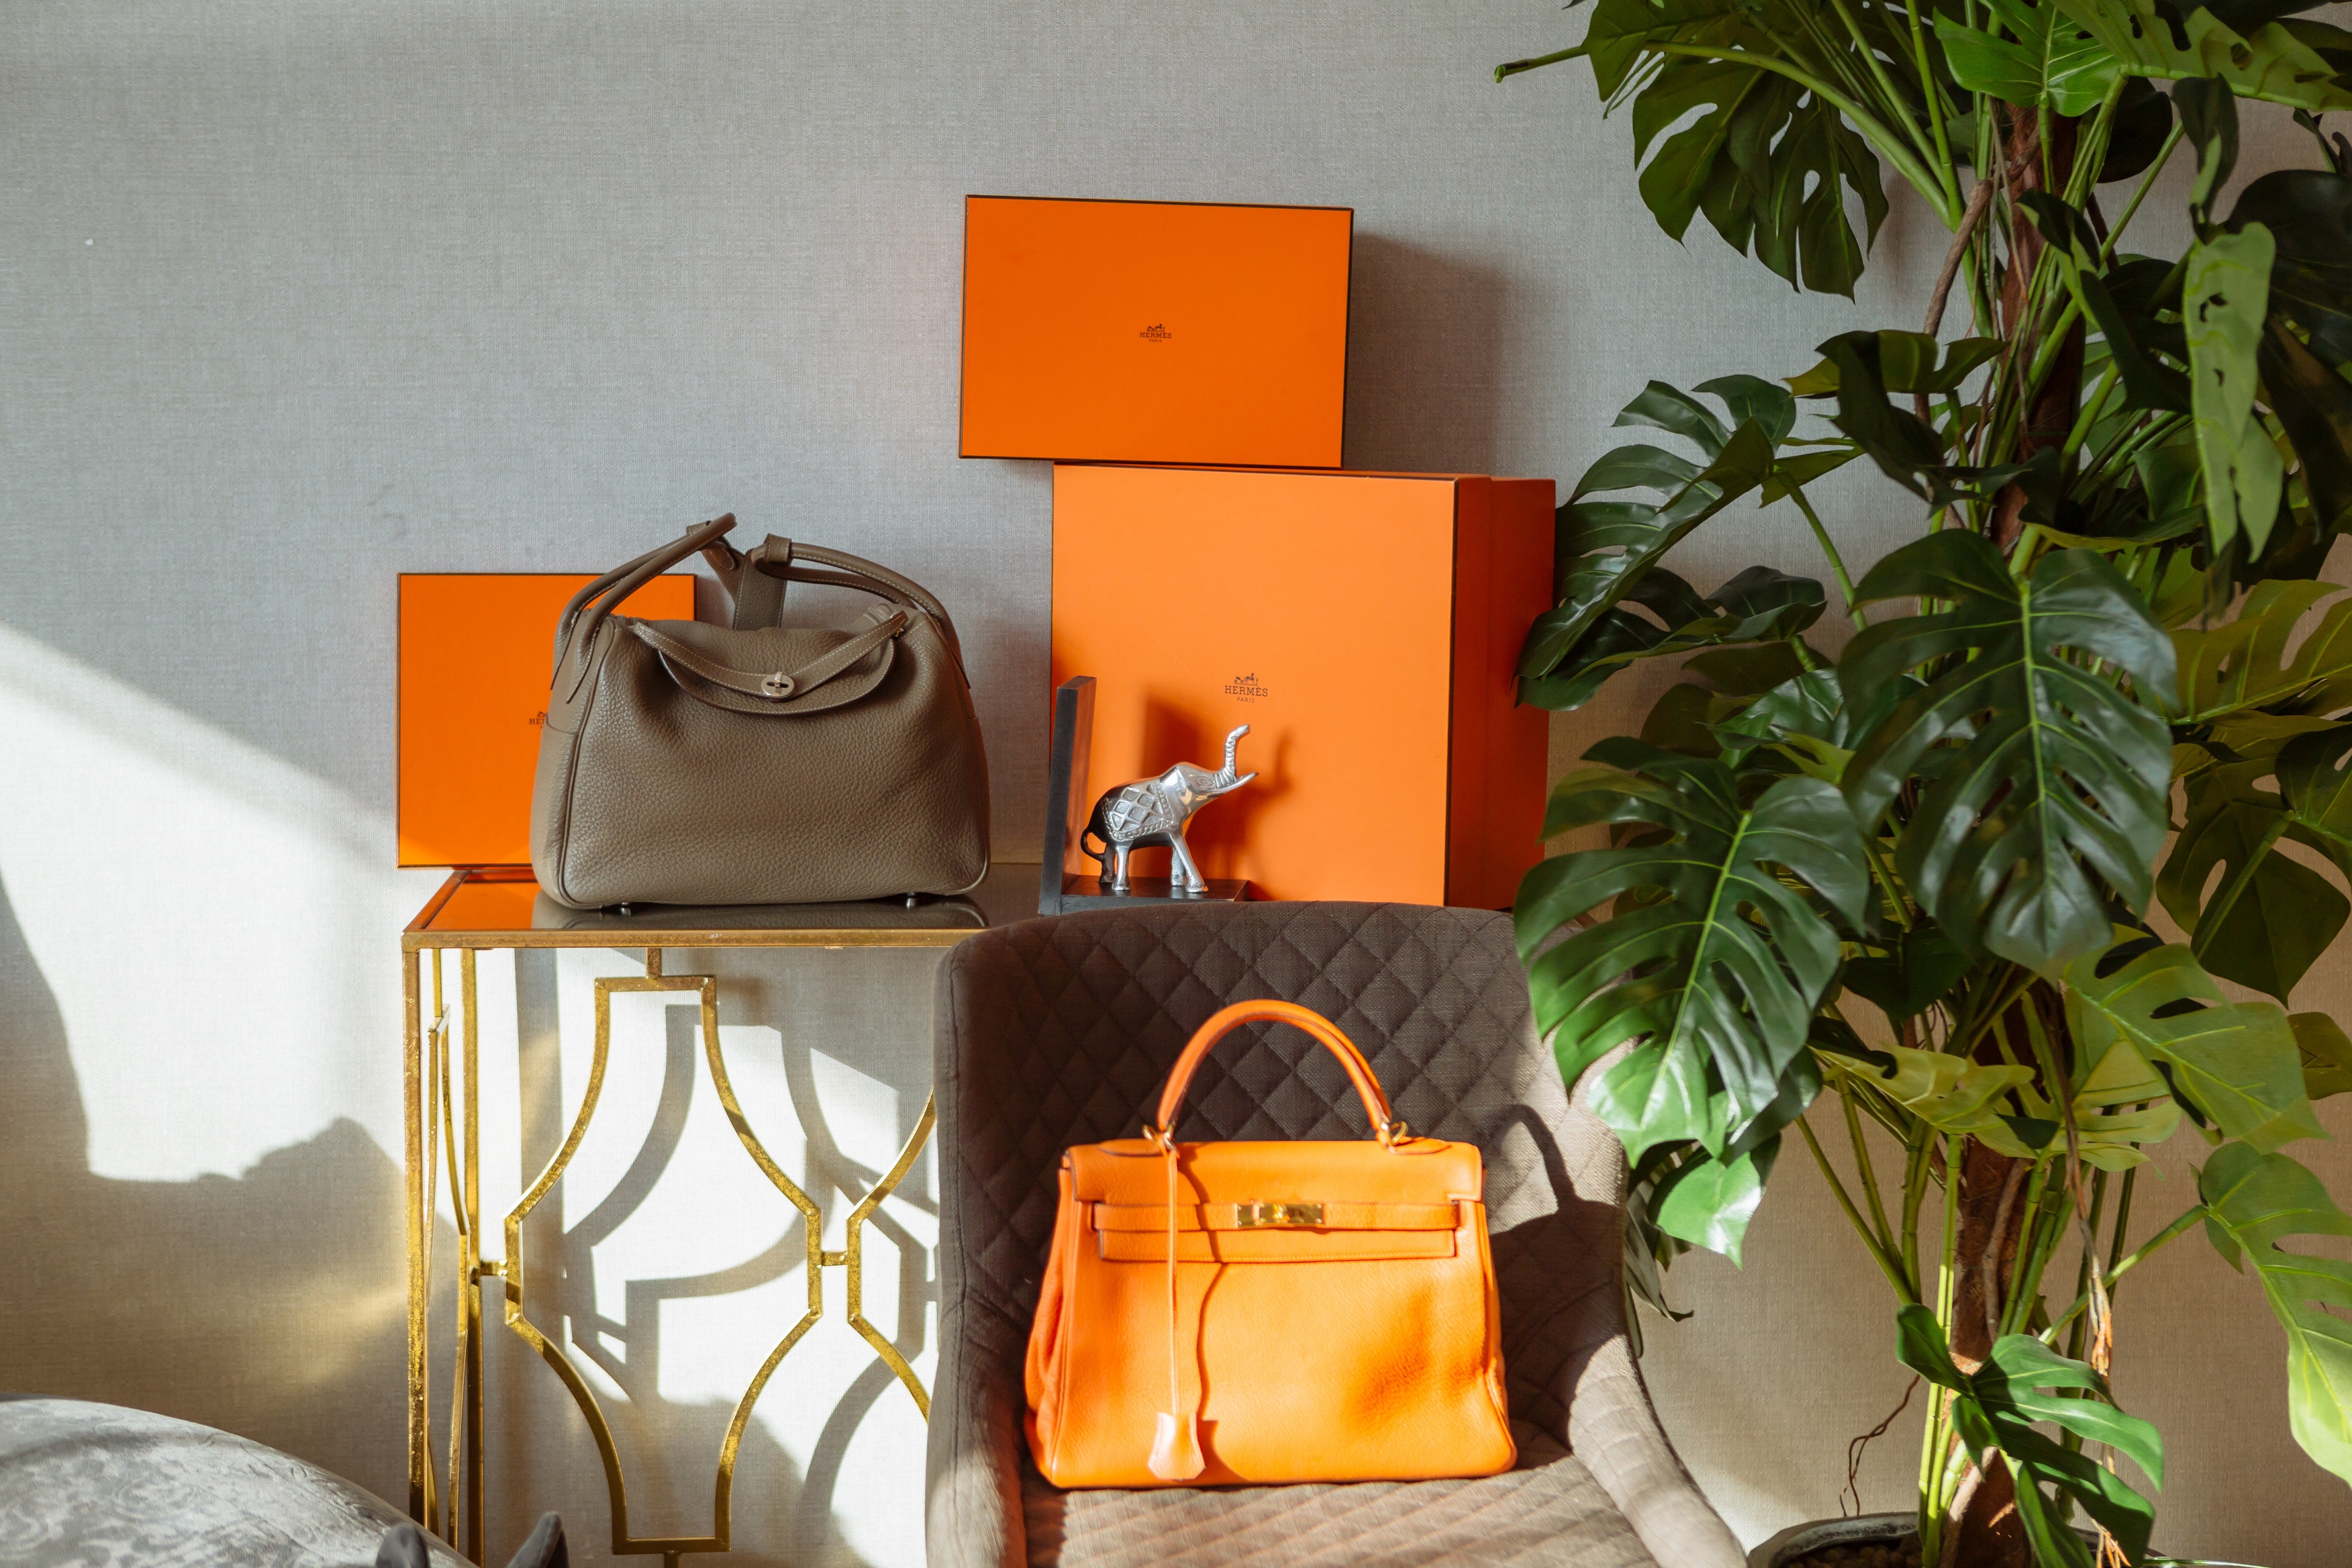 How Much Do Hermes Bags Cost? From The Cheapest To The Most Expensive –  Bagaholic